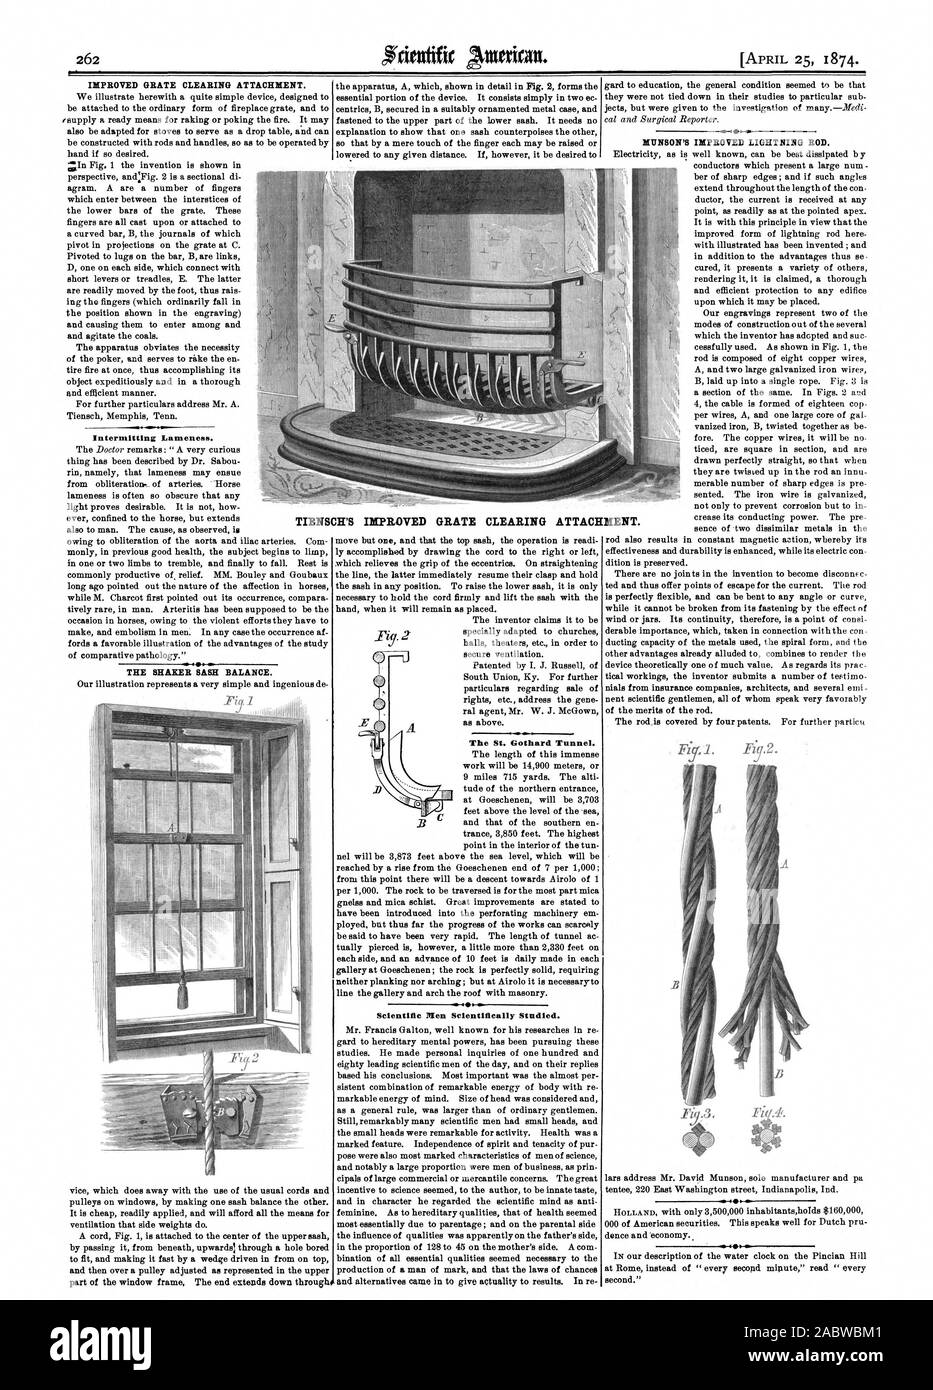 IMPROVED GRATE CLEARING ATTACHMENT. Intermitting Lameness. The St. Gothard Tunnel. Scientific Men Scientifically Studied. . MUNSON'S IMPROVED LIGHTNING ROD. THE SHAKER SASH BALANCE. TIENSCH'S IMPROVED GRATE CLEARING ATTACHMENT., scientific american, 1874-04-25 Stock Photo